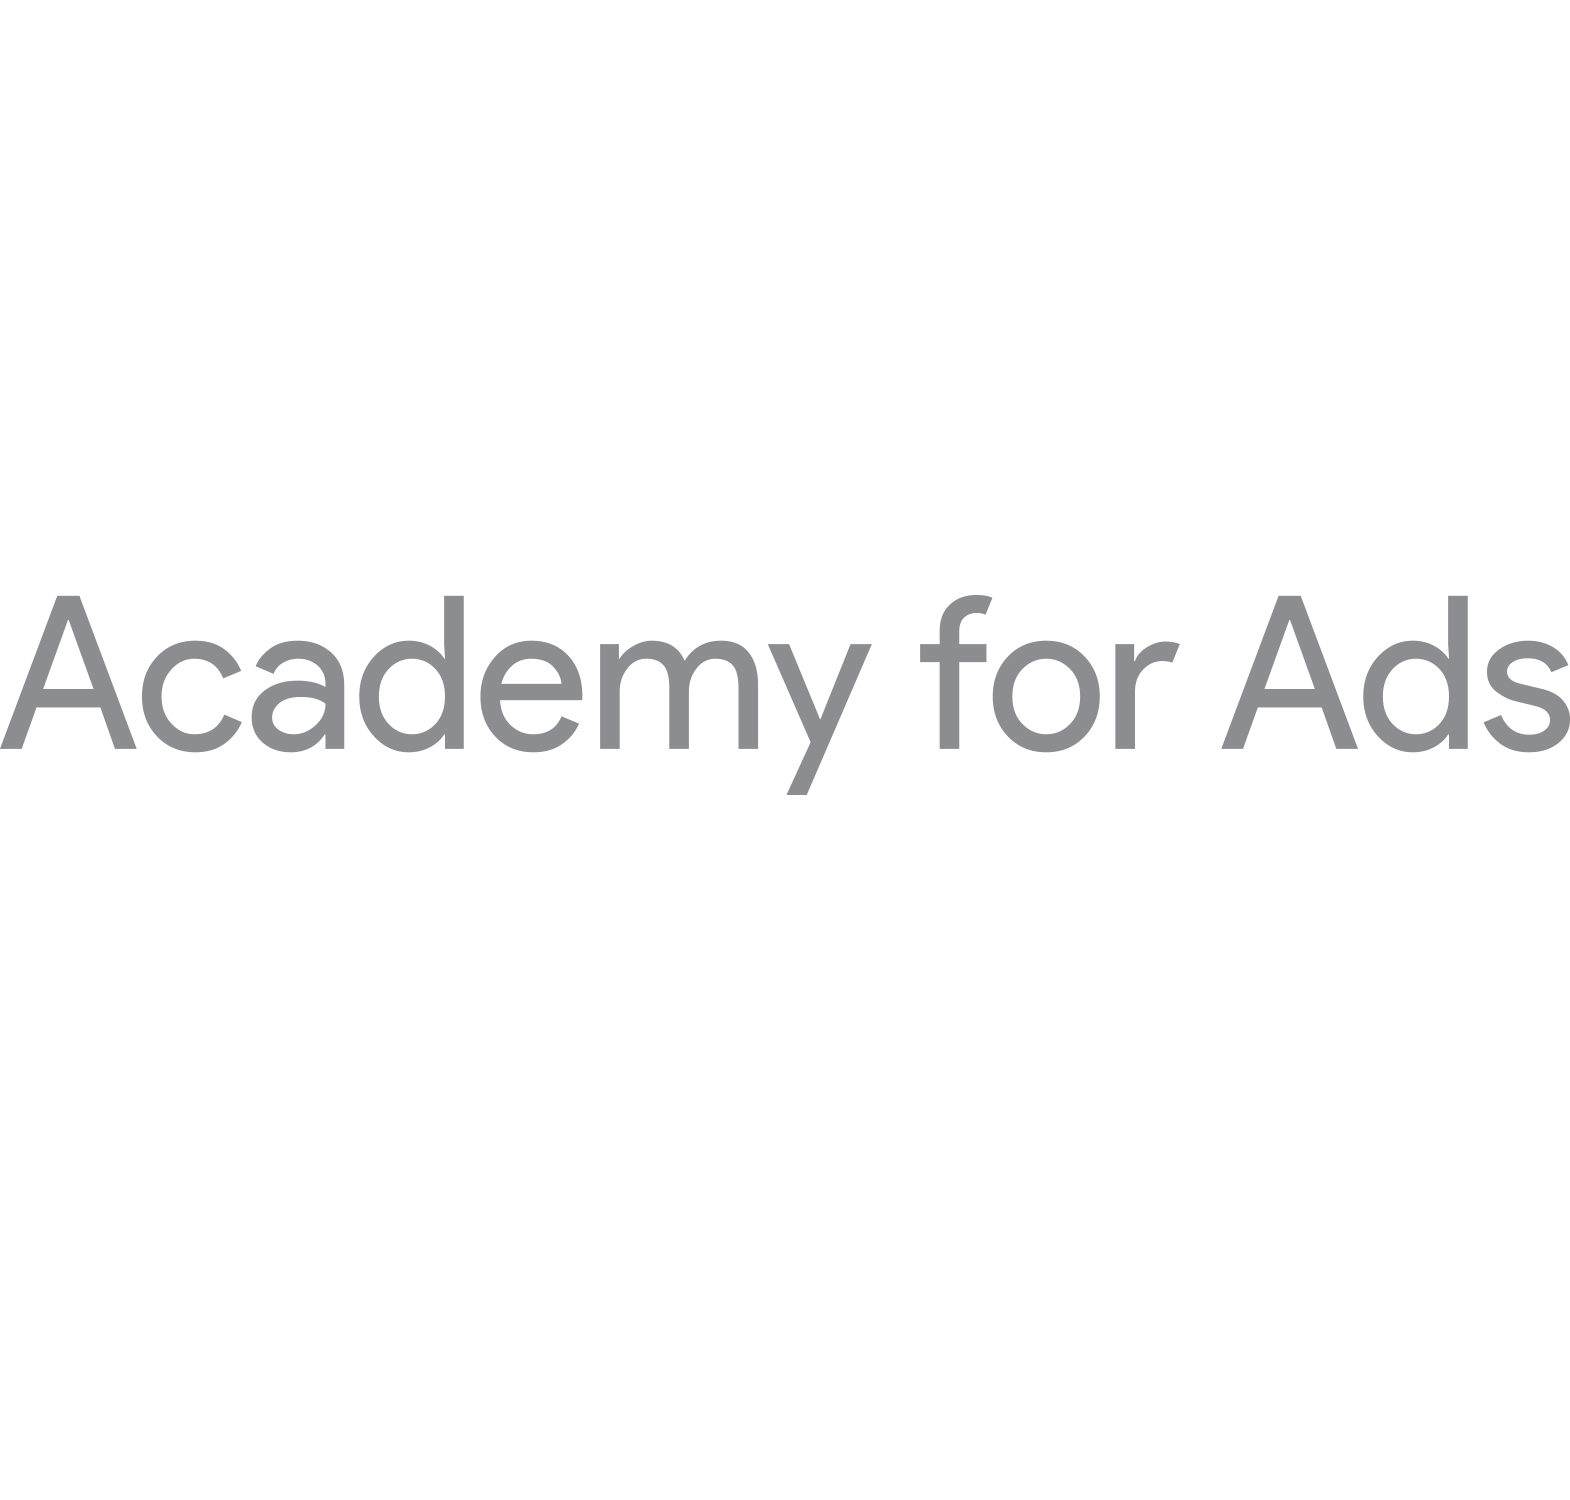 Academy for Ads Gain the skills to succeed with Google ads Find fast and easy to use education on Google AdWords Double and digital marketing